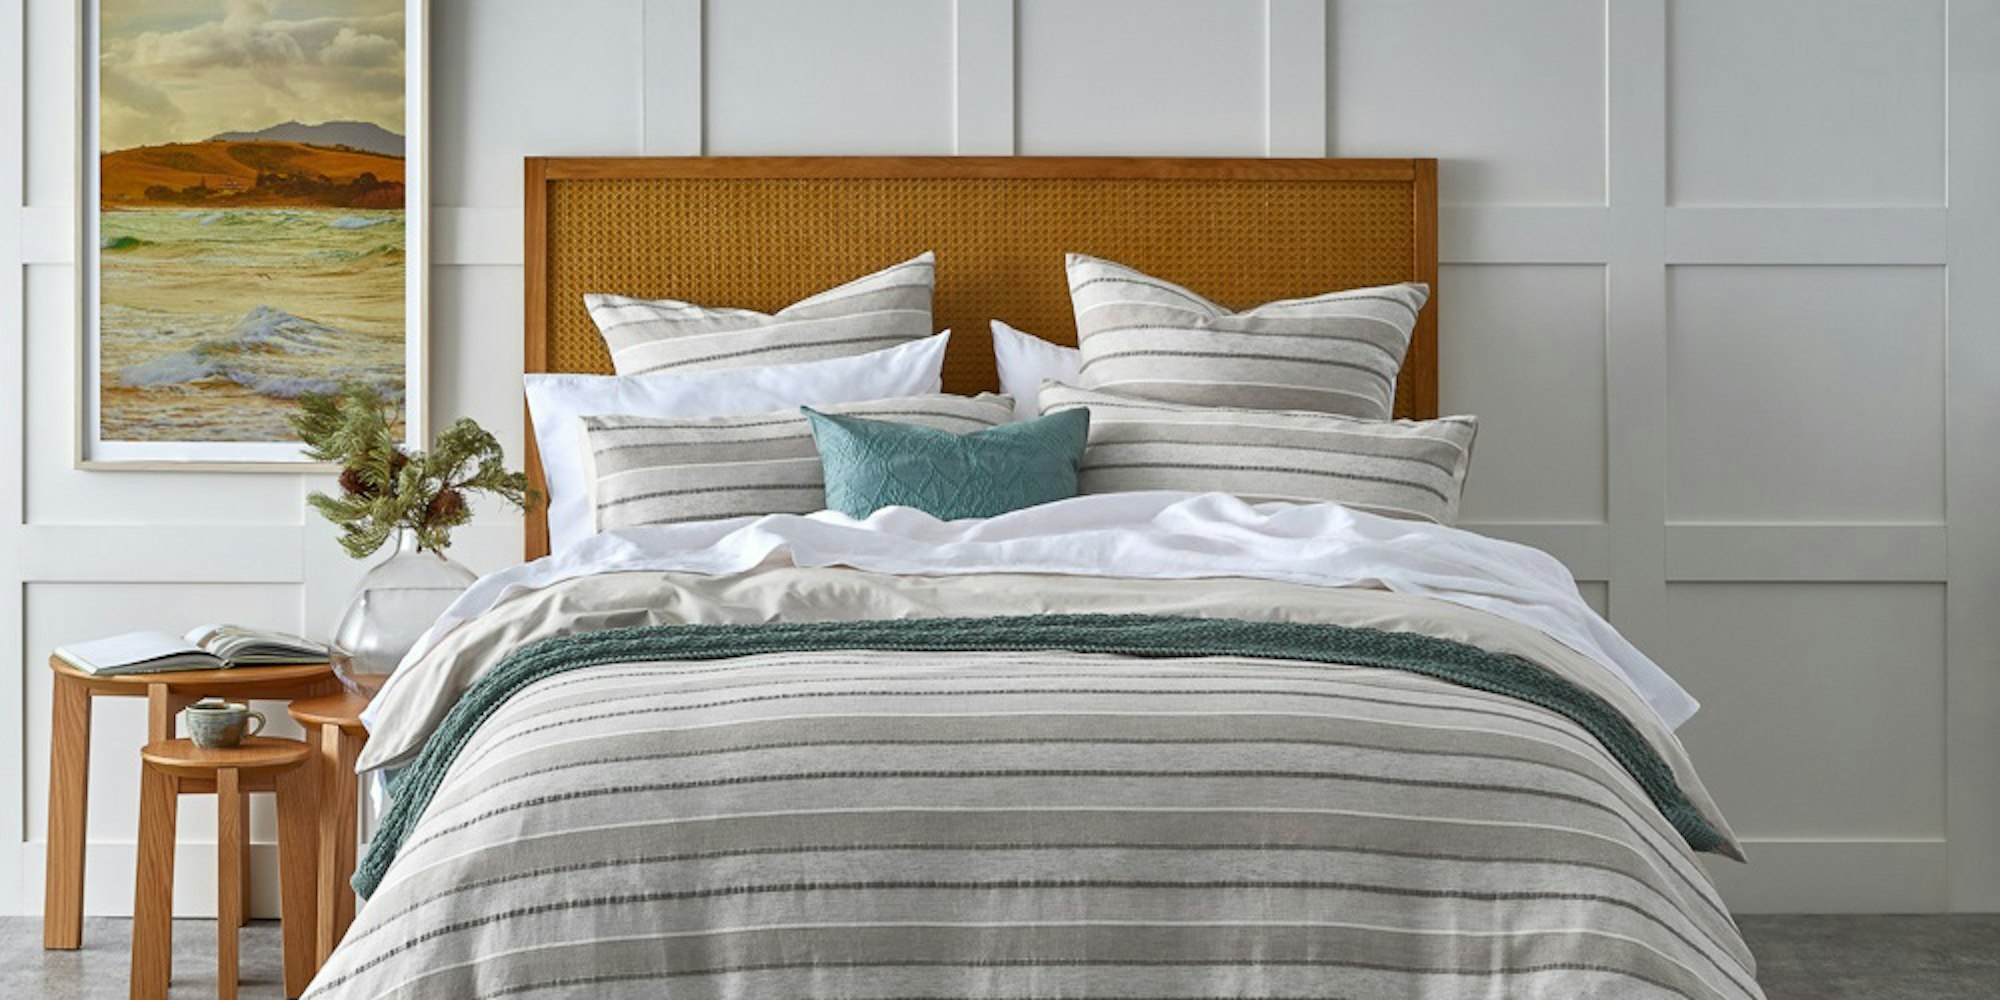 Striped bedroom setting in cool tones with layered cushions, side tables and throws.